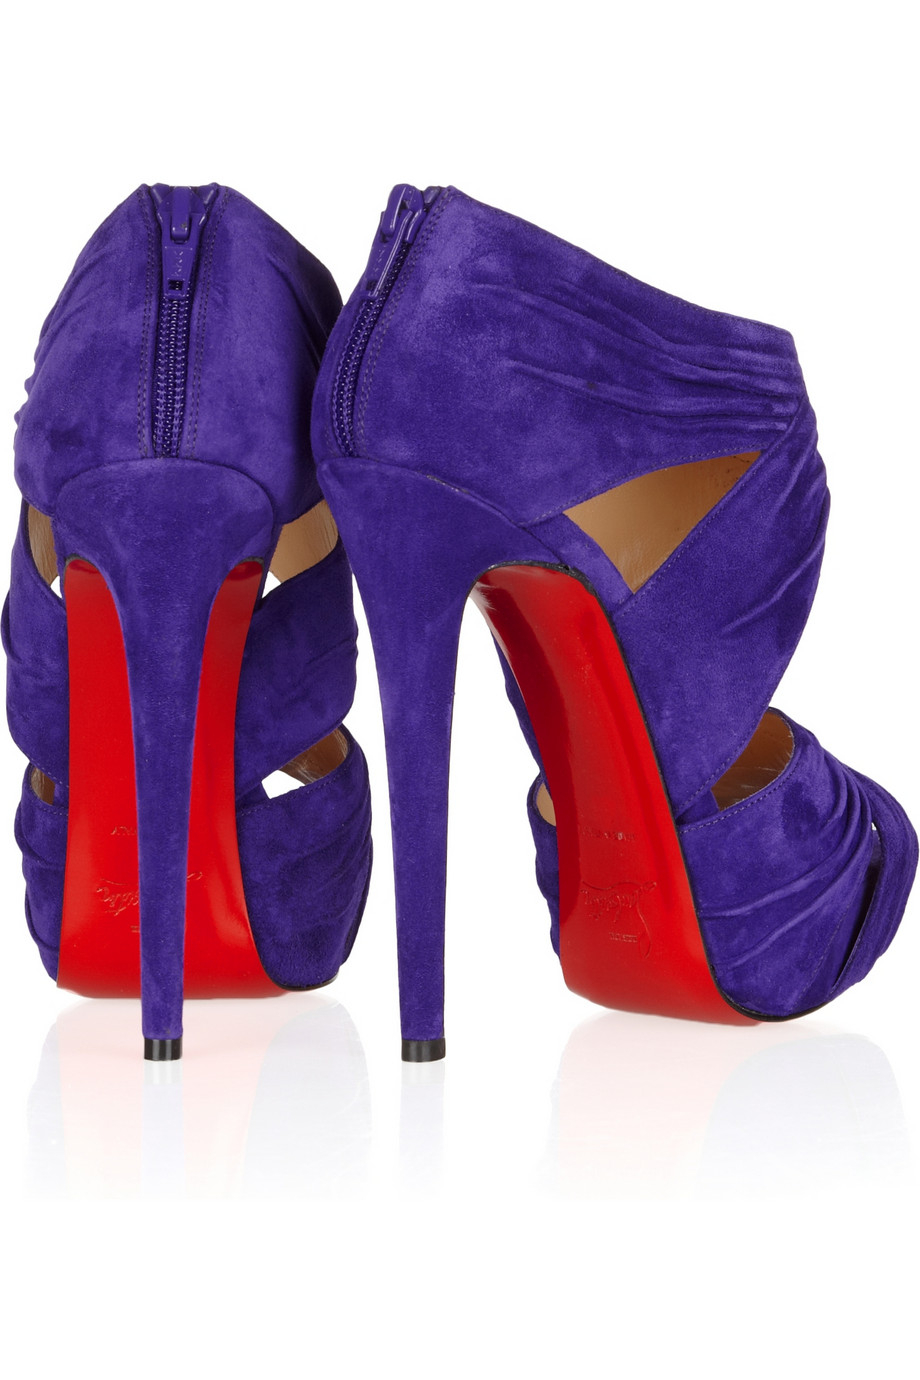 Christian Louboutin Bandra 140 Ruched Suede Sandals in Violet